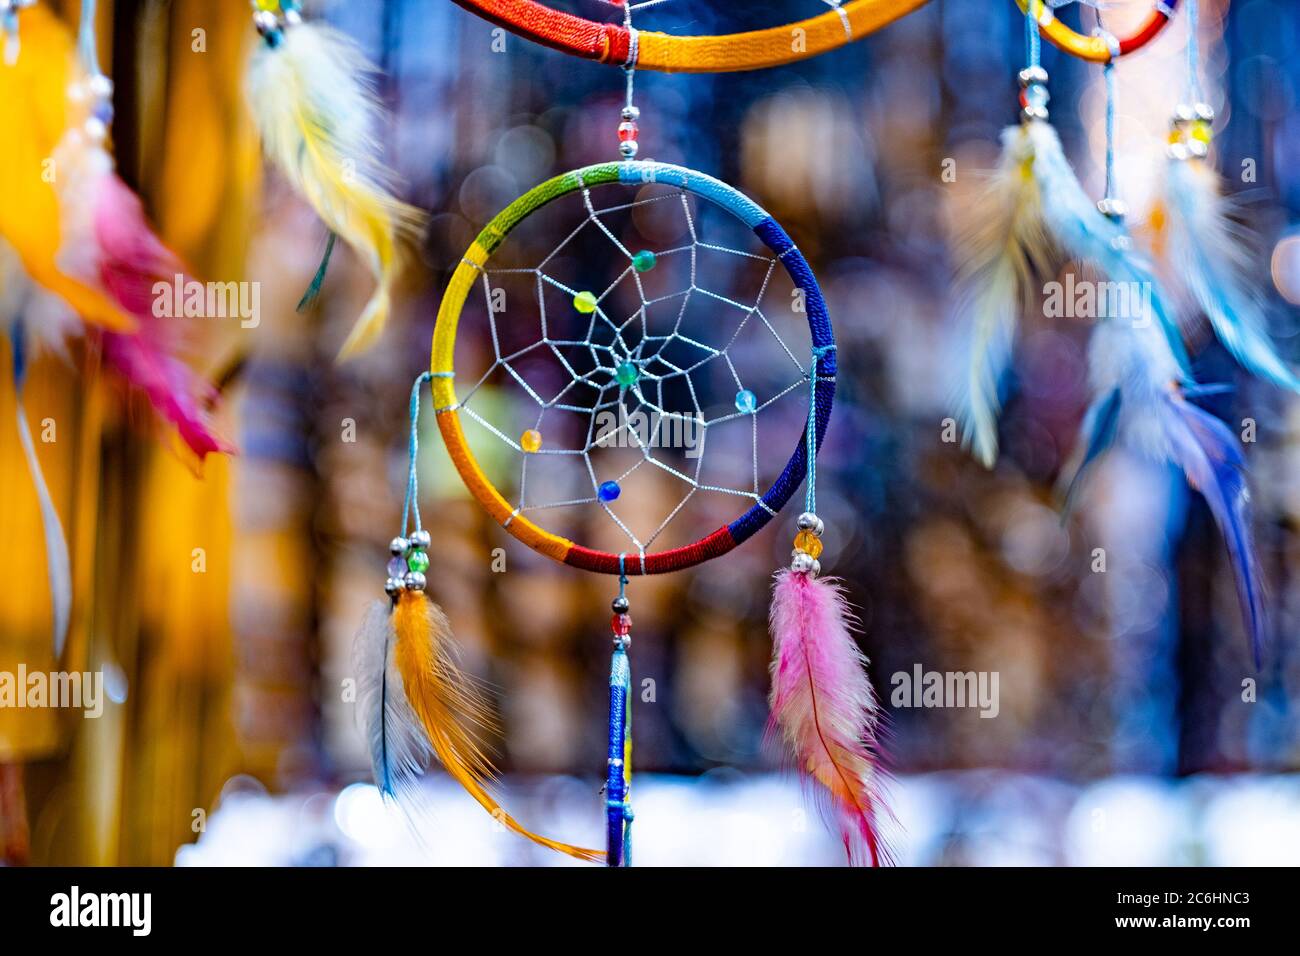 https://c8.alamy.com/comp/2C6HNC3/beautiful-colorful-dream-catcher-for-sell-in-souvenir-shop-on-blurred-background-2C6HNC3.jpg